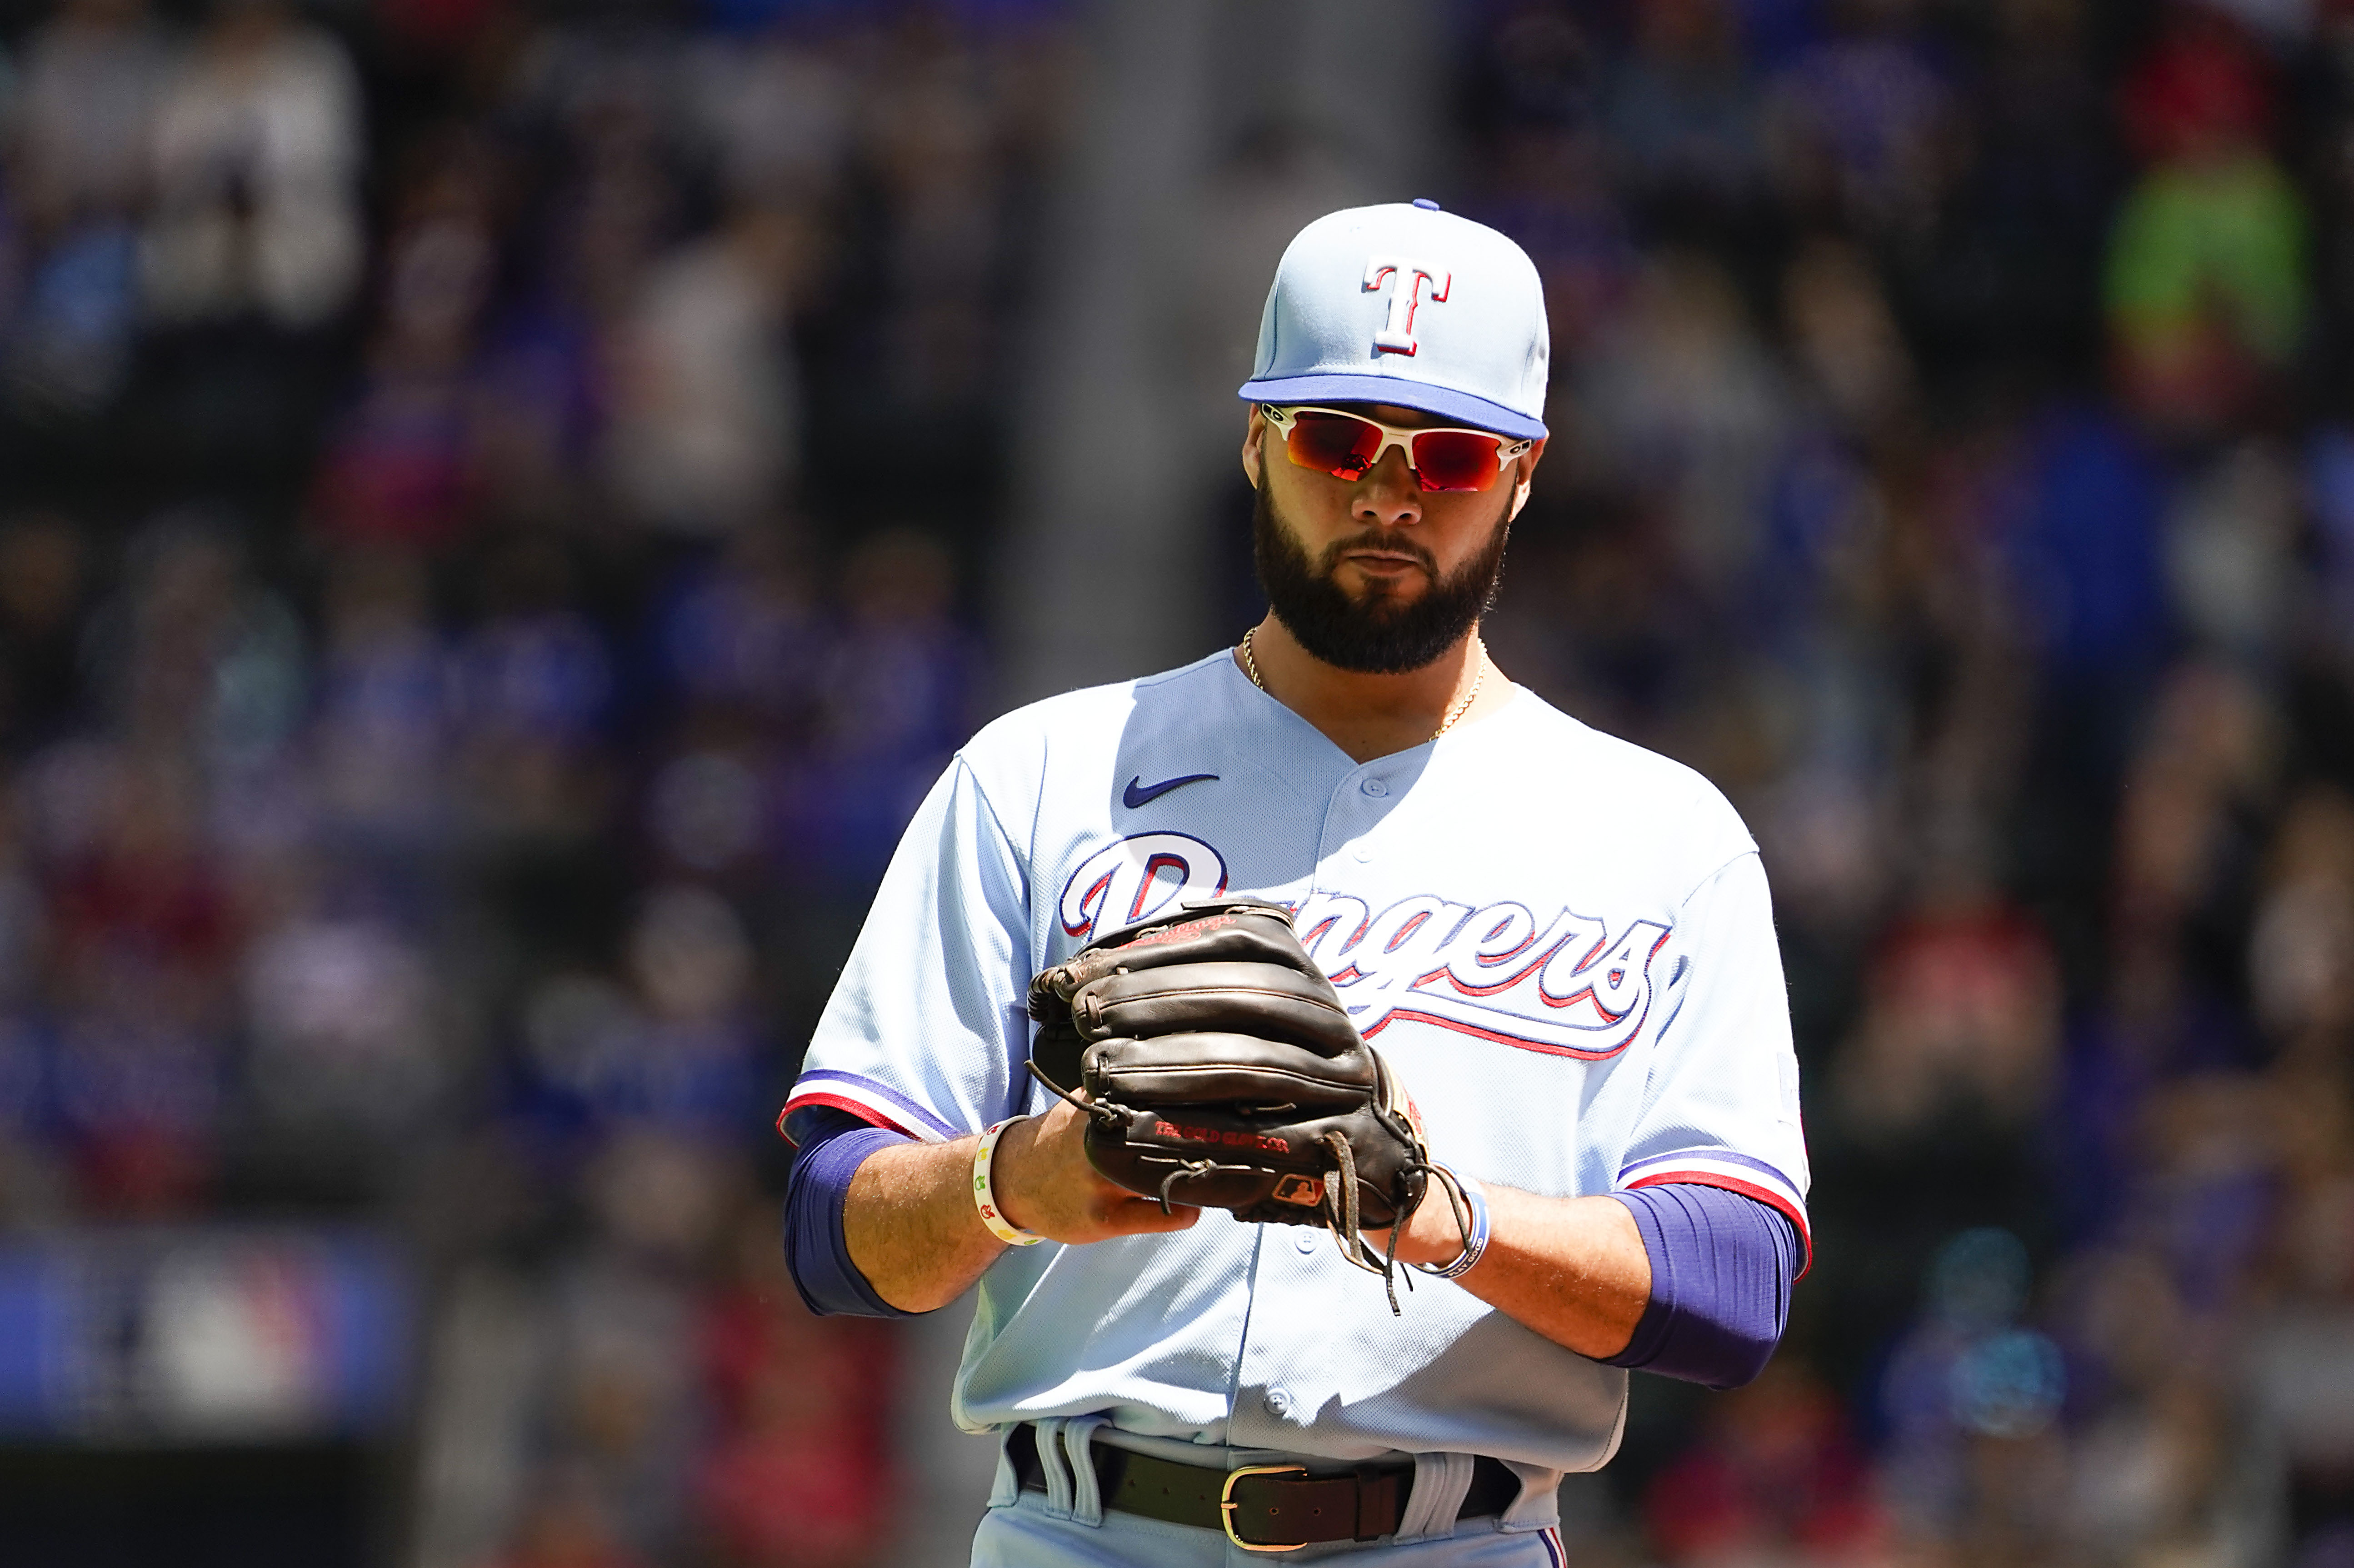 While searching for a long-term leadoff hitter, Rangers experiment